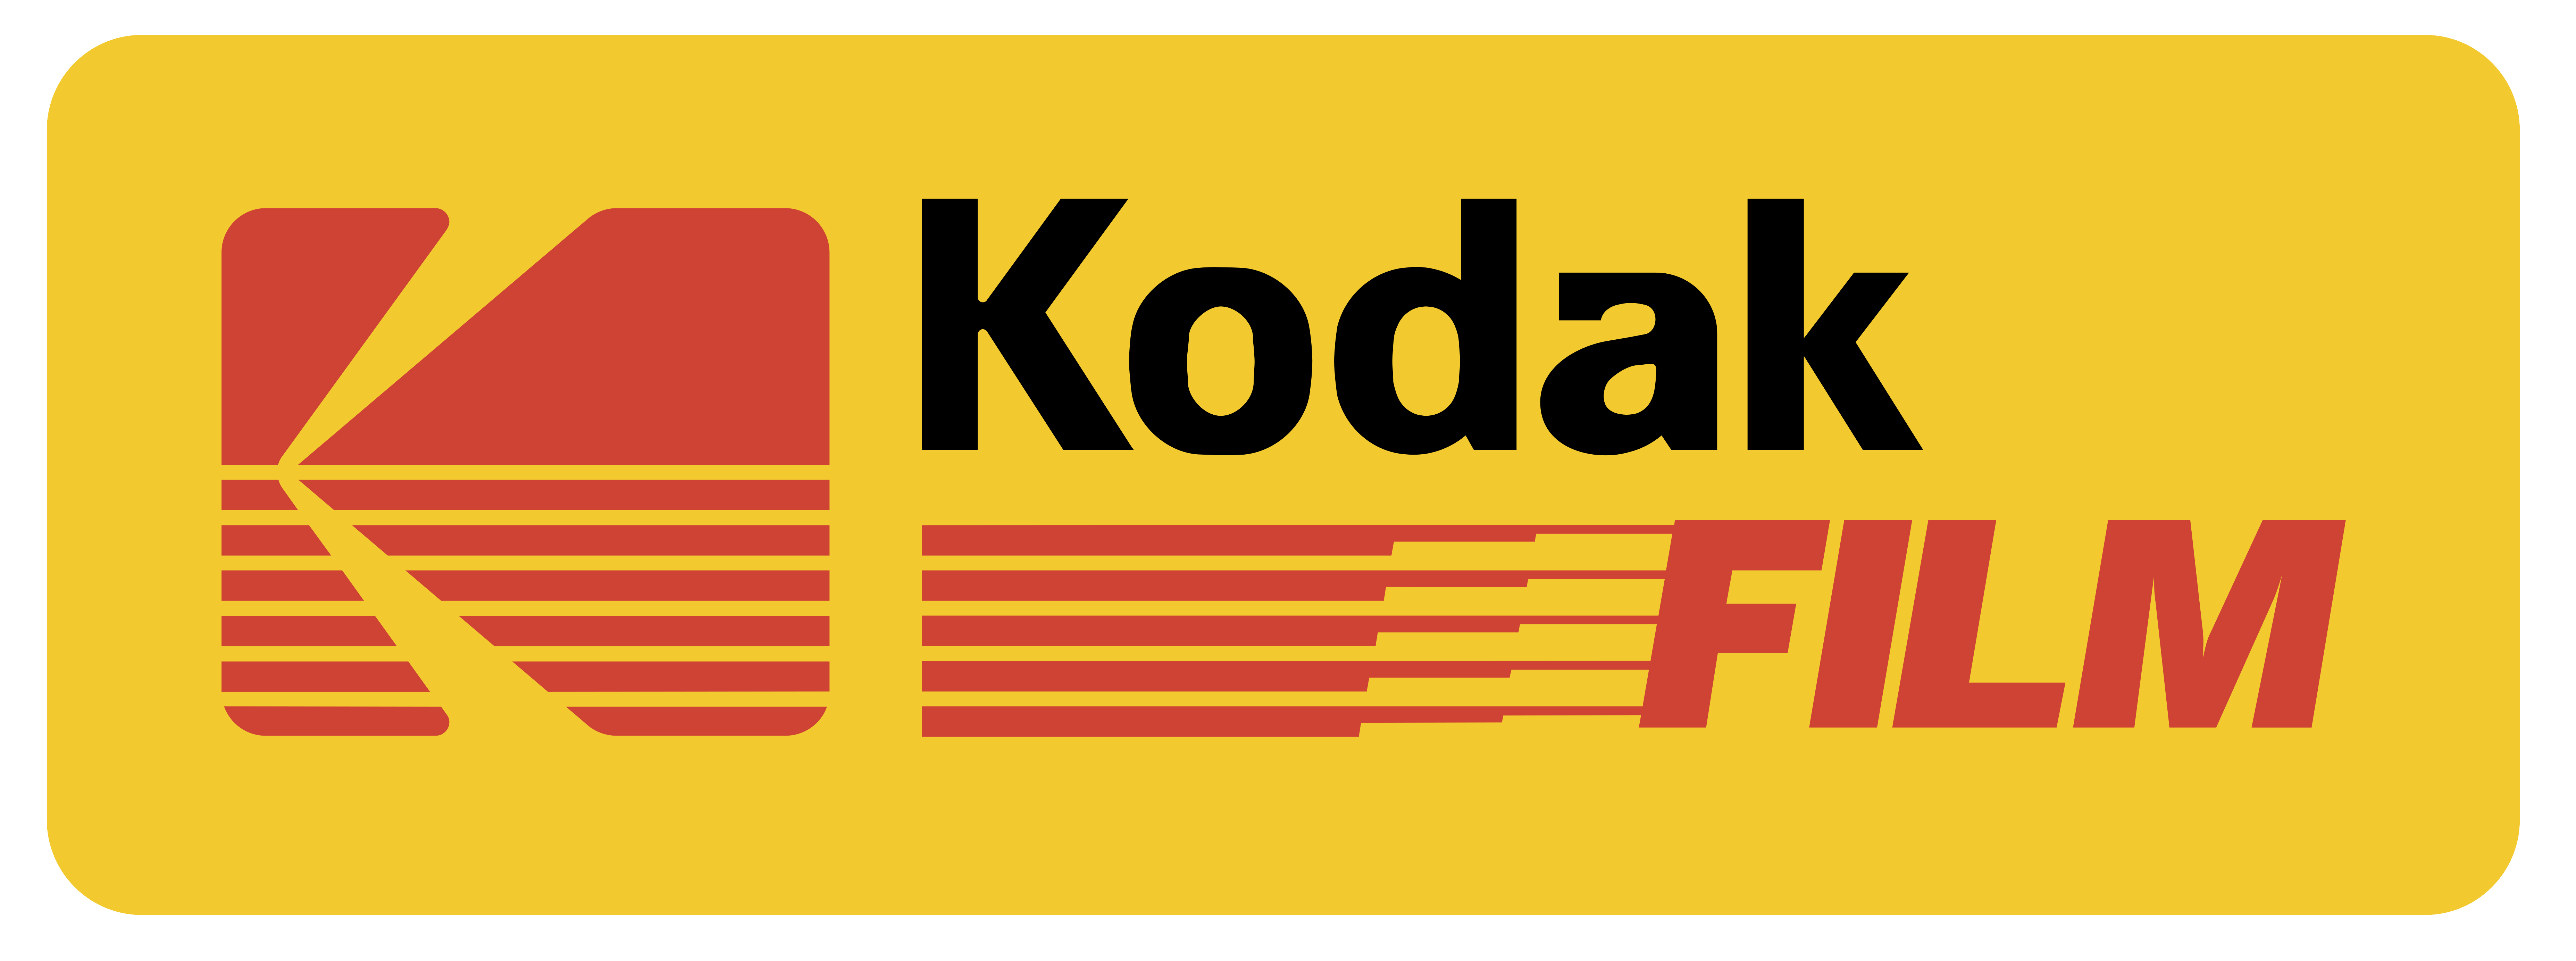 Brand New: New Logo and Identity for Kodak by Work-Order